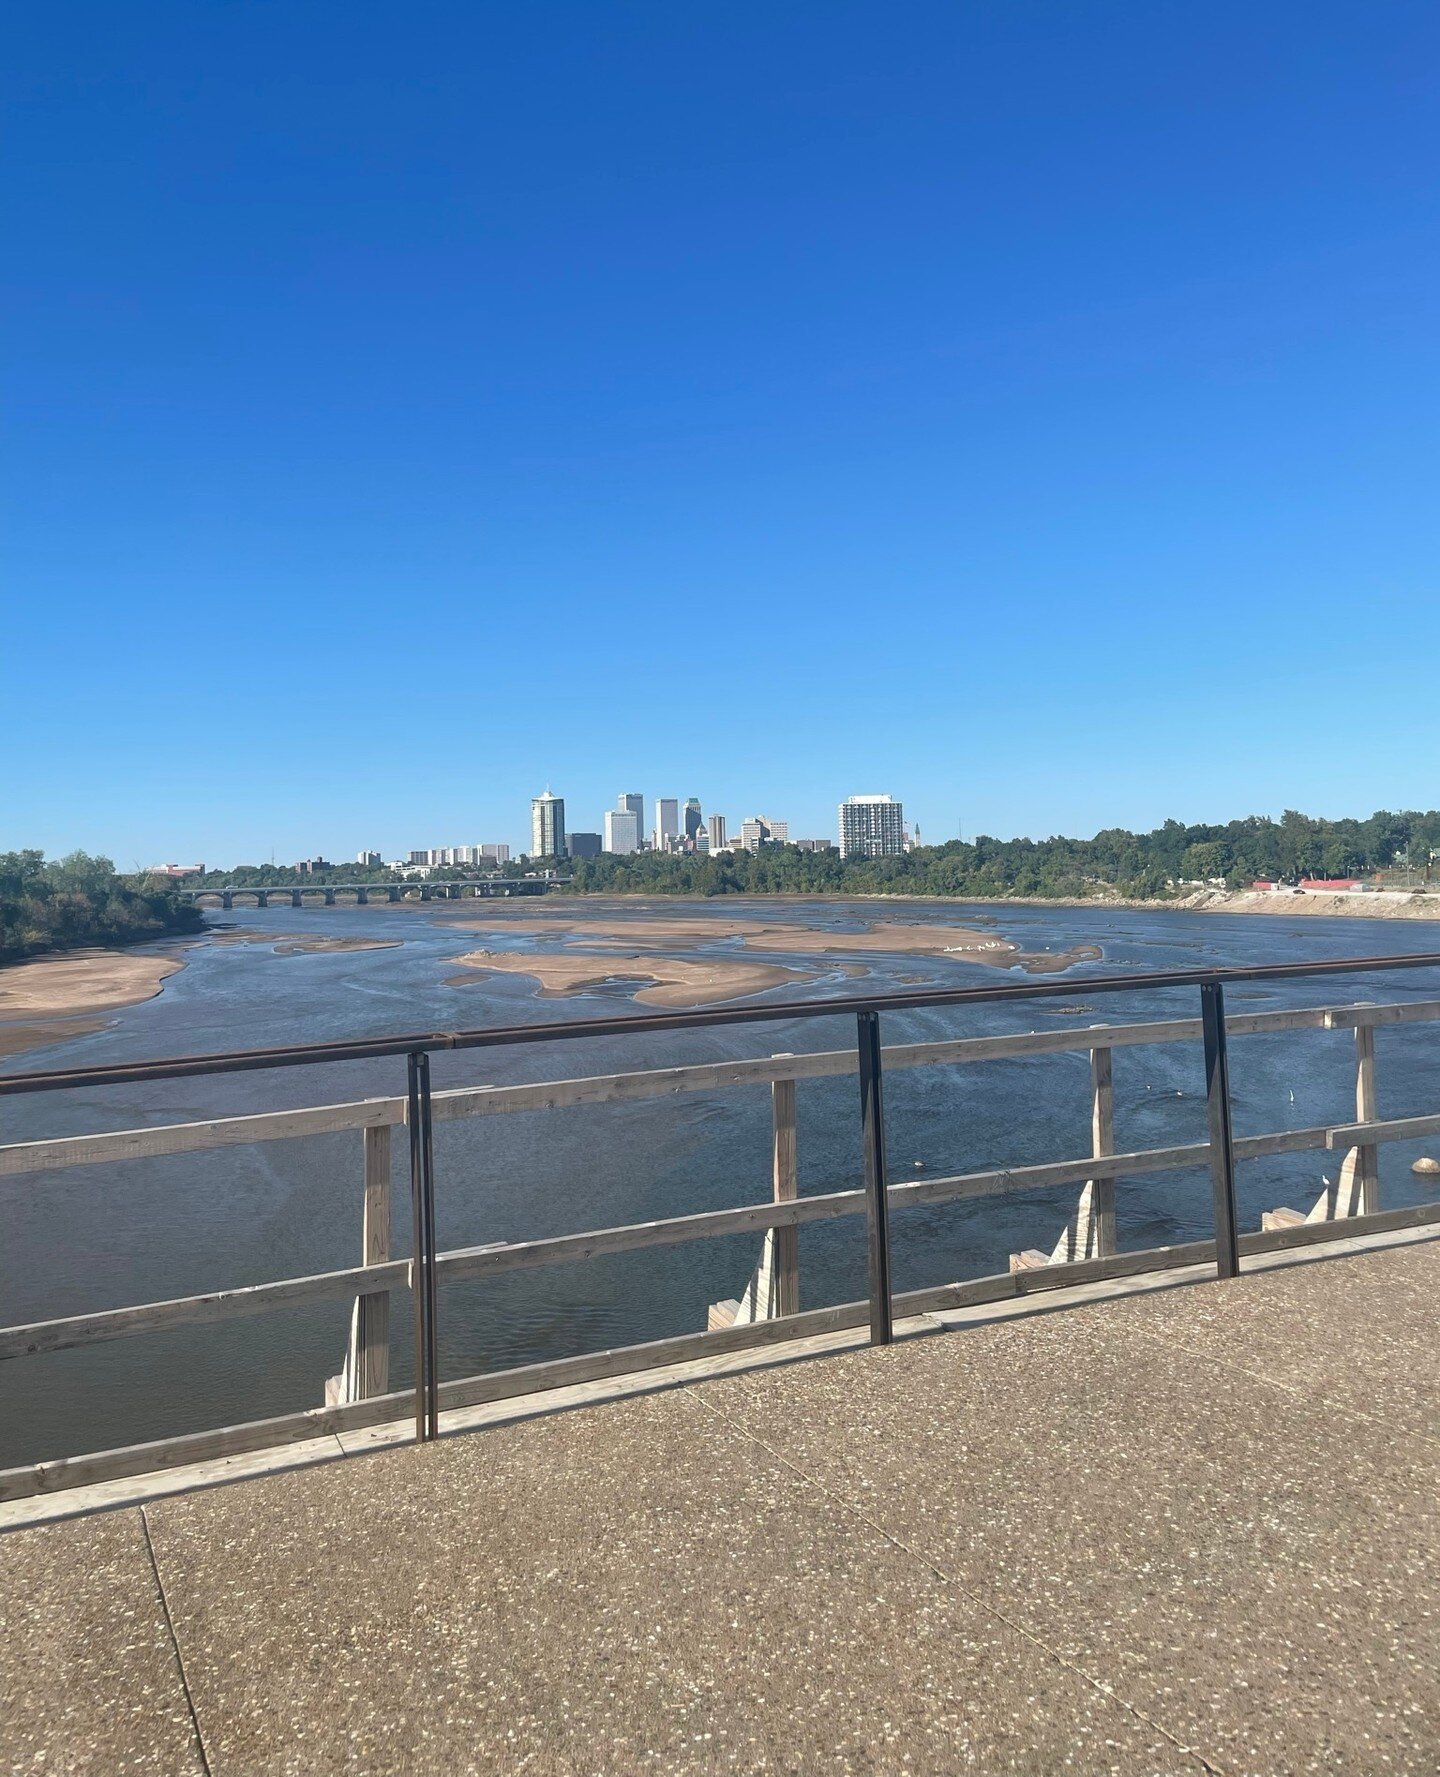 WDesigner @BlakeCottey had an opportunity last week to check out the progress being made on the new &quot;Williams Crossing&quot; pedestrian bridge over the Arkansas River. Our thanks to the @Cityoftulsa and the Sales Tax Overview Committee, along wi